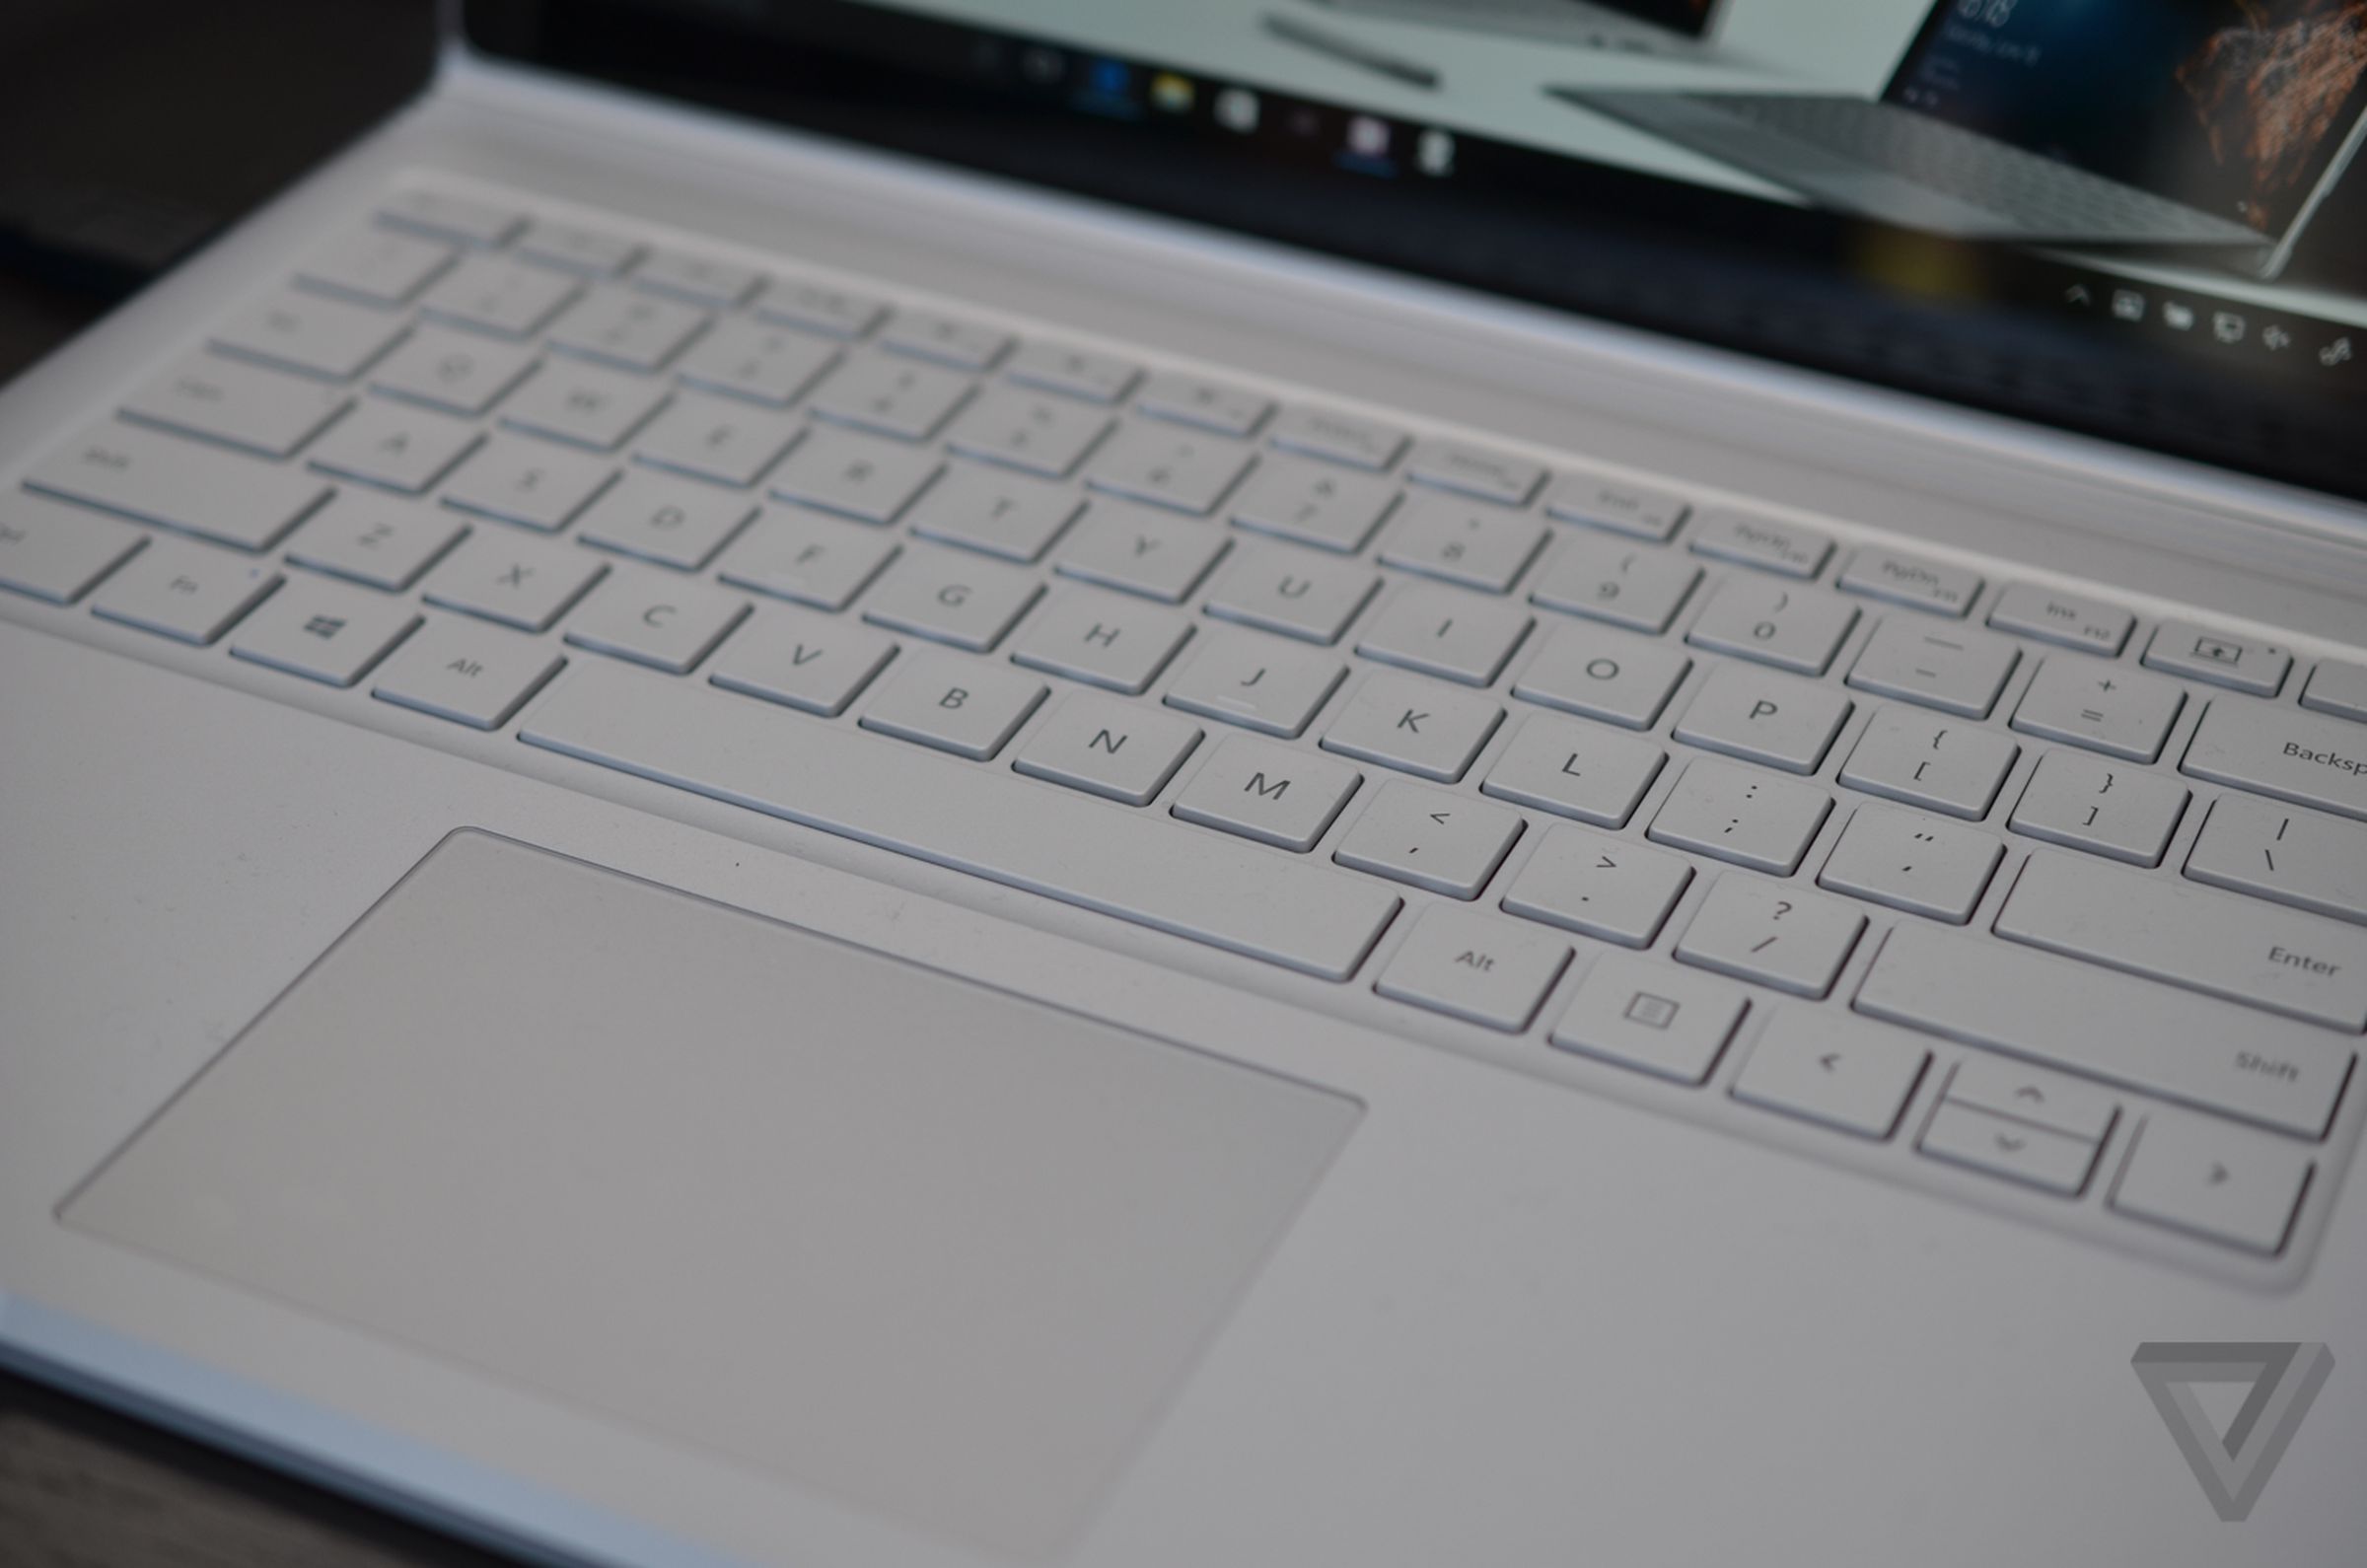 Microsoft Surface Book (2016) hands-on photos